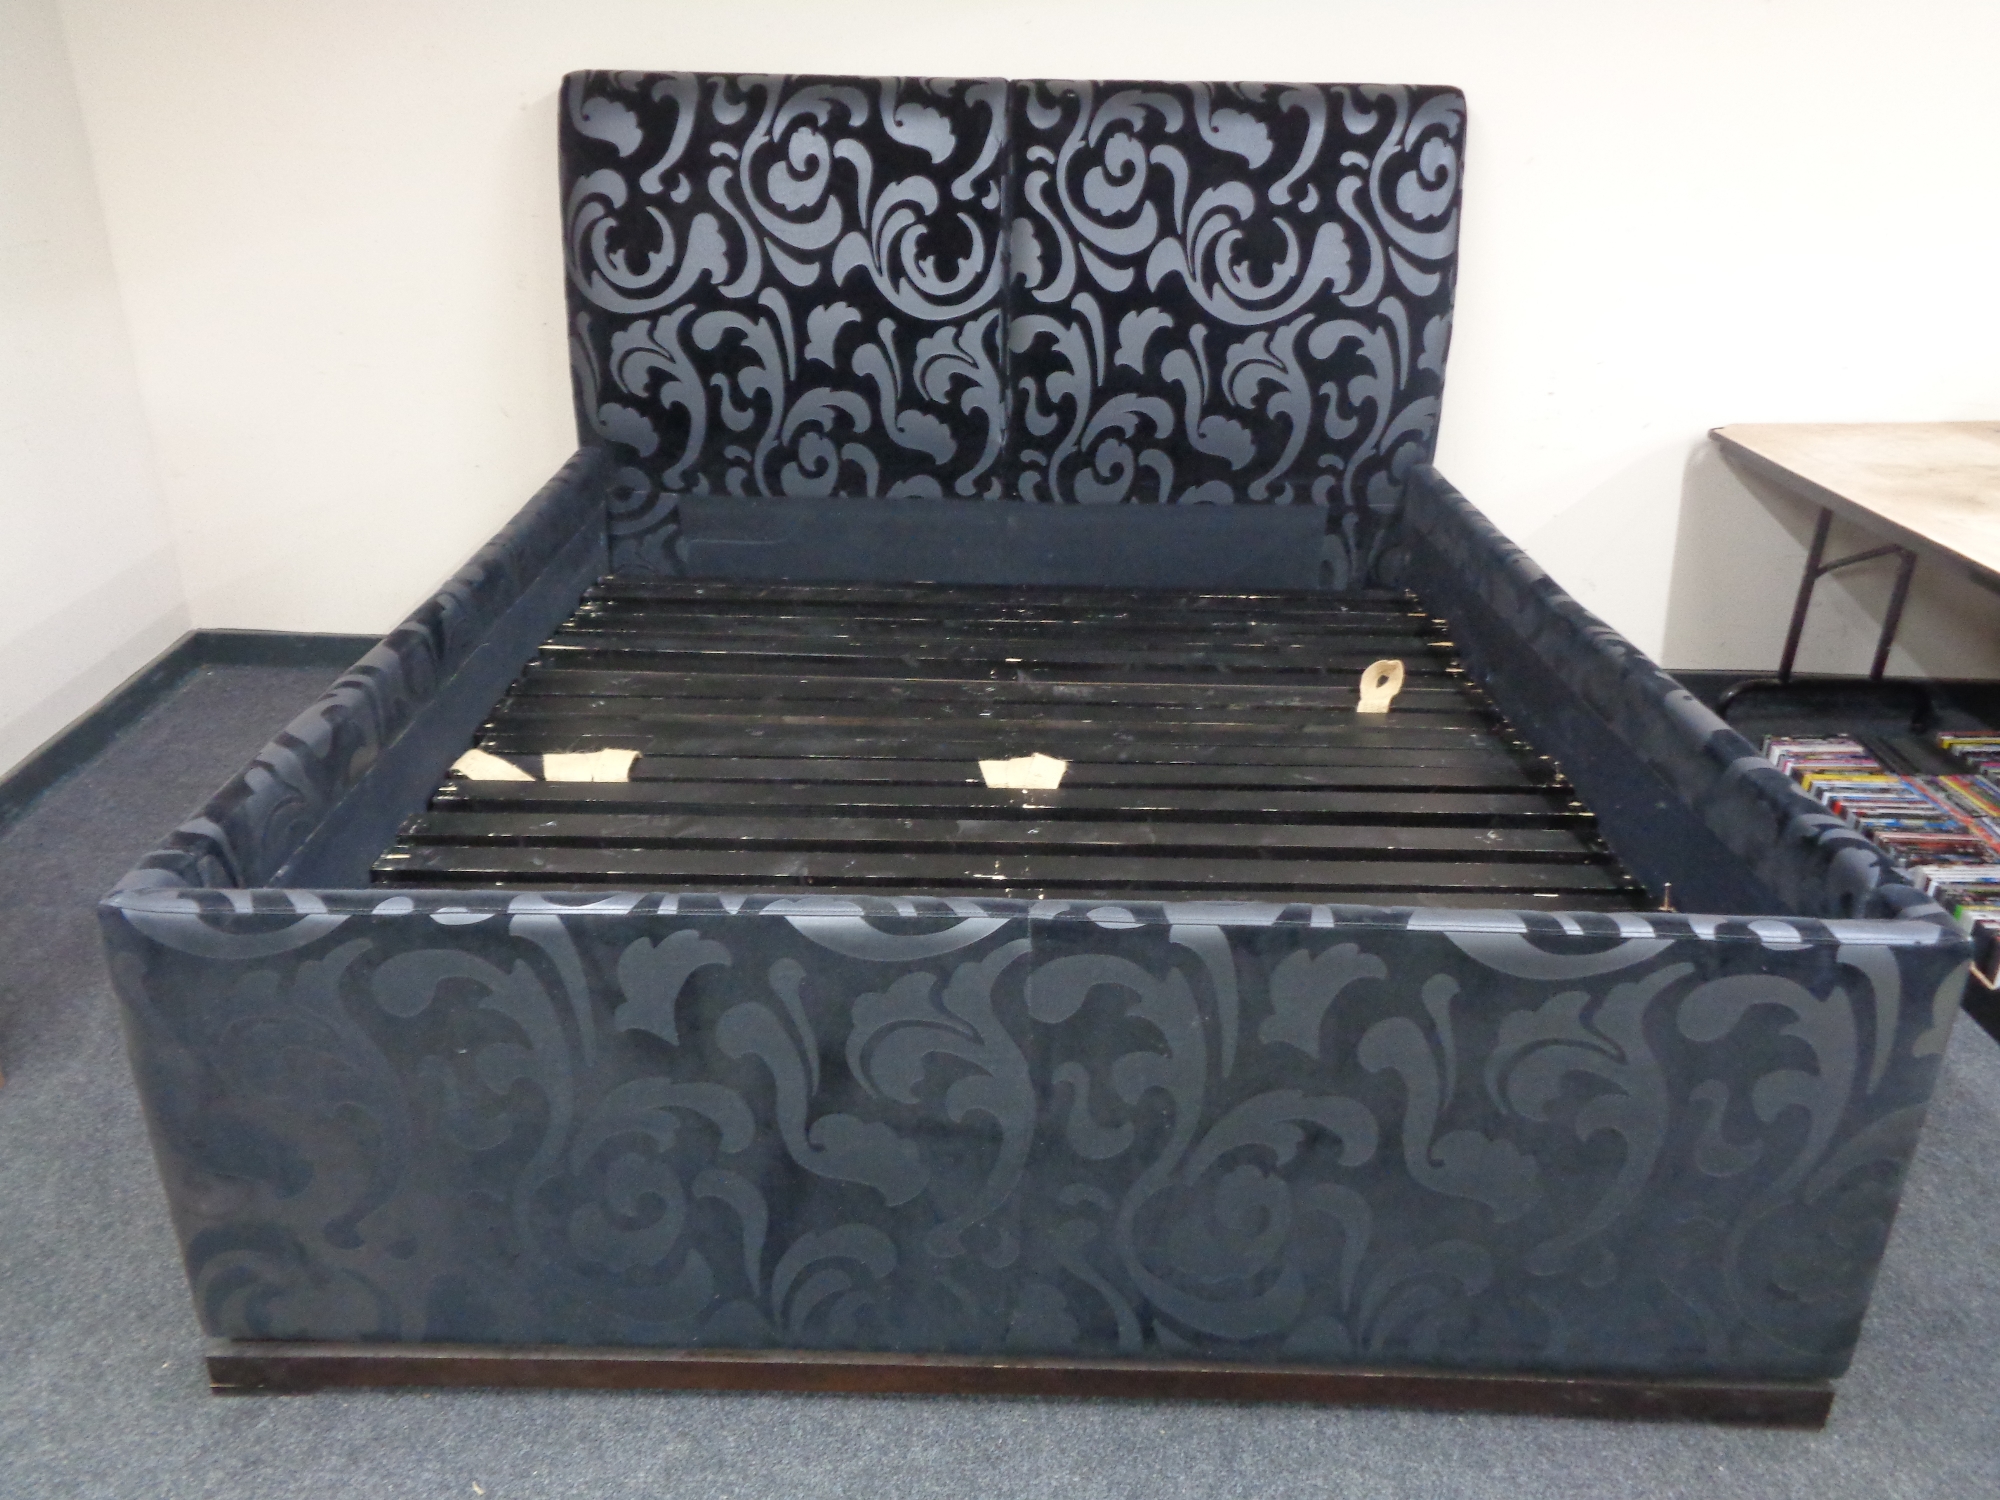 A 6ft bed frame upholstered in a black and silver fabric.